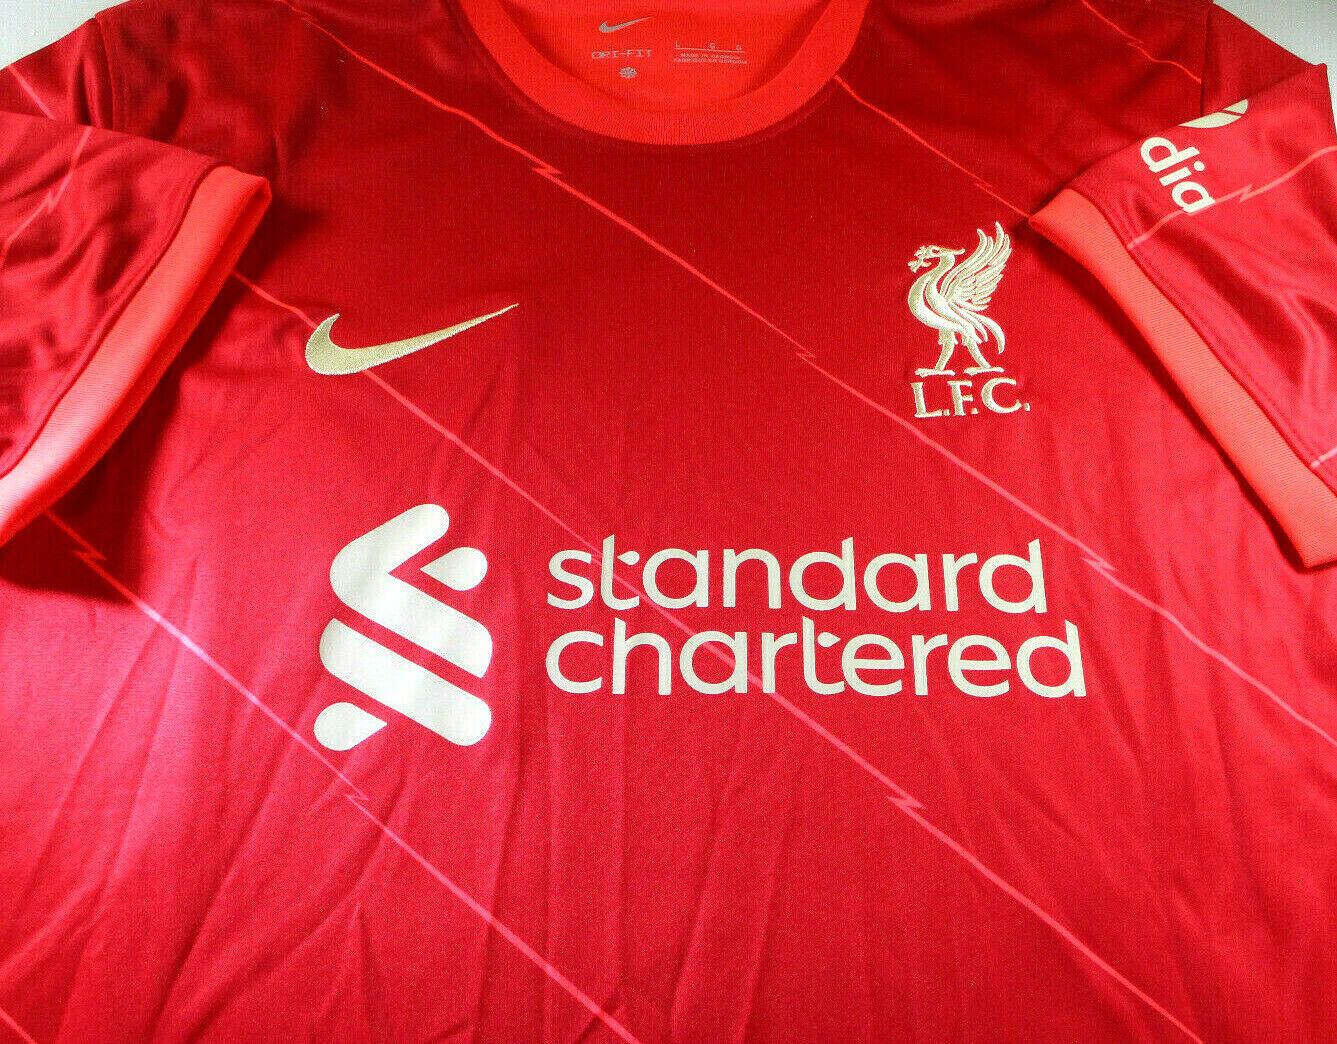 Diogo Jota / Autographed Liverpool F.C. Nike Dri-Fit Red Soccer Jersey / Beckett